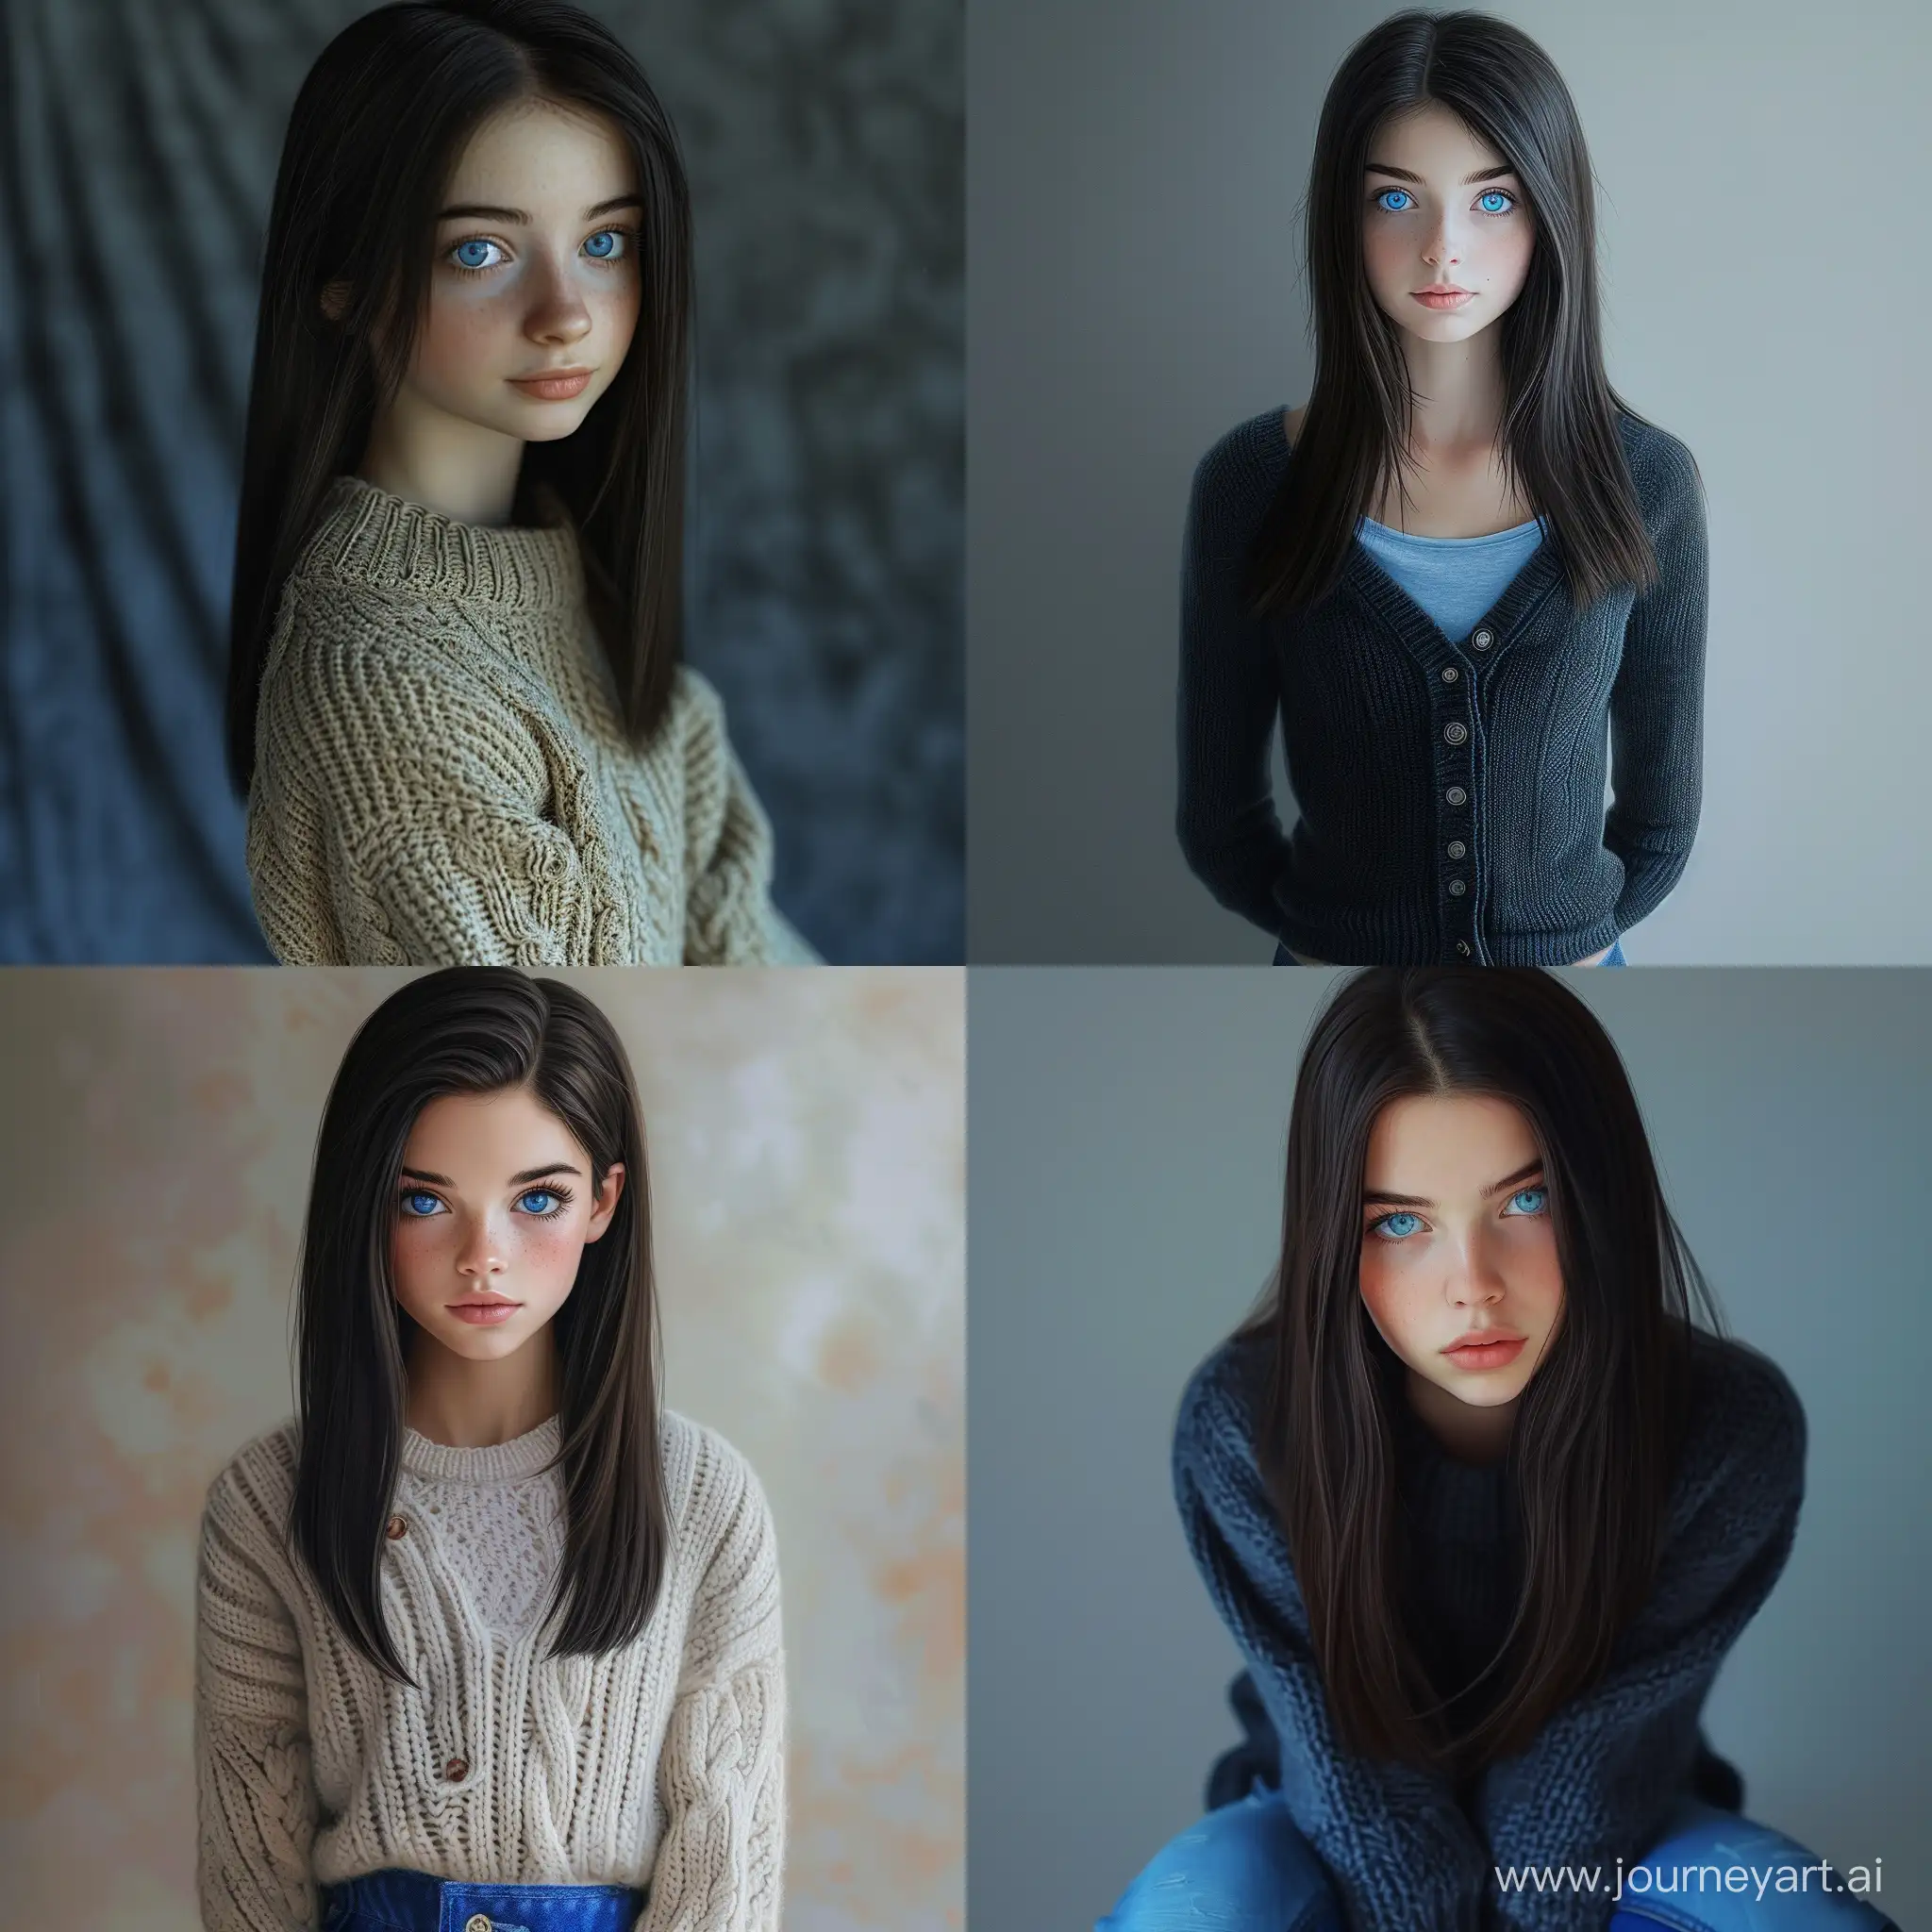 Chic-Teenager-in-Knitted-Cardigan-HighQuality-Realistic-Art-of-a-15YearOld-Girl